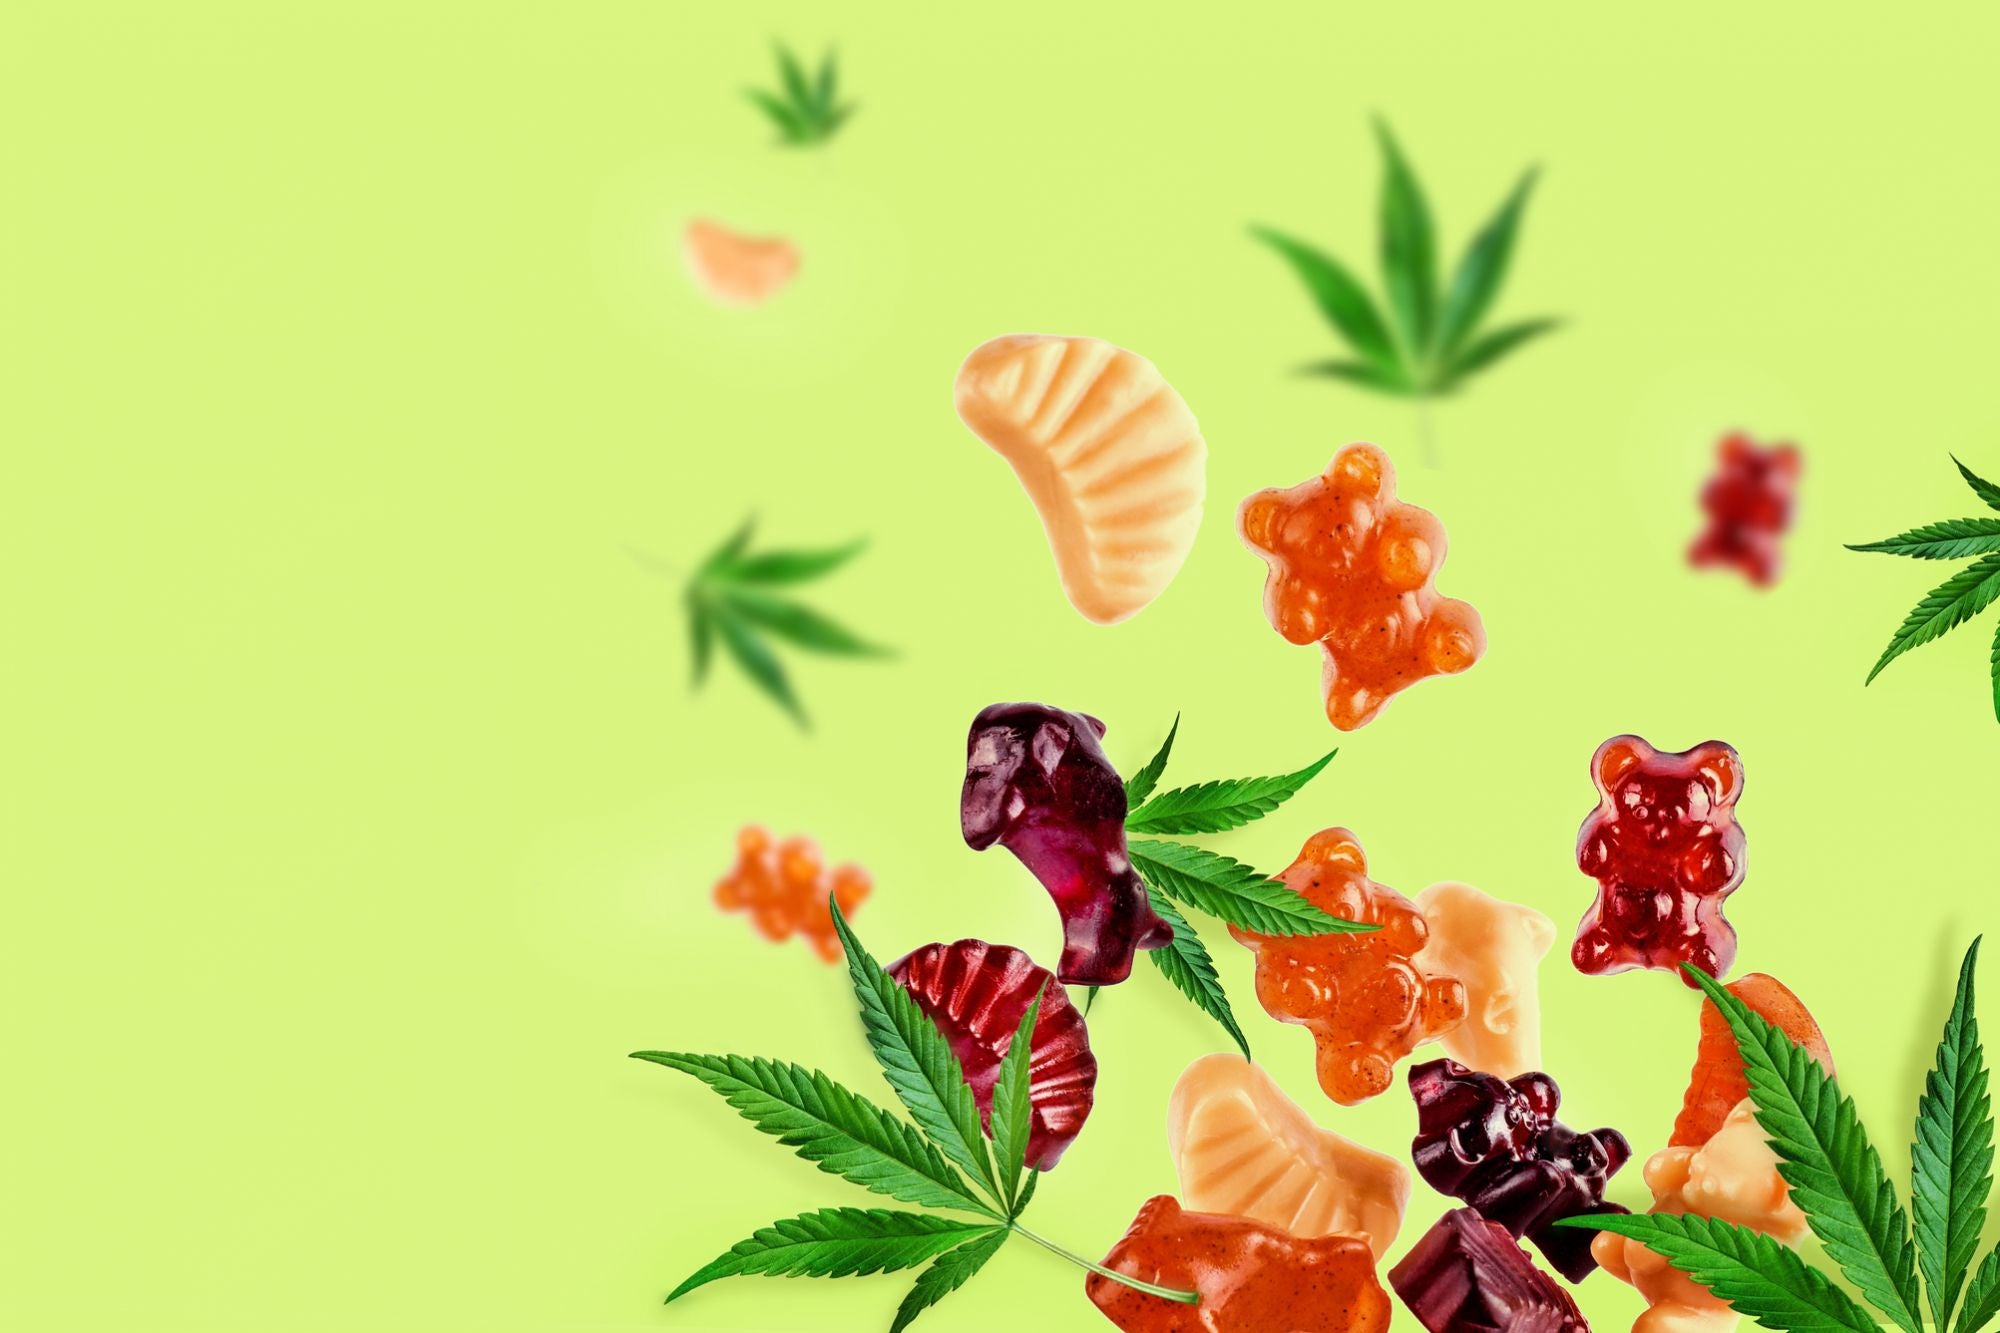 Pain Begone: Ranking the Live Resin Gummies for Wellness